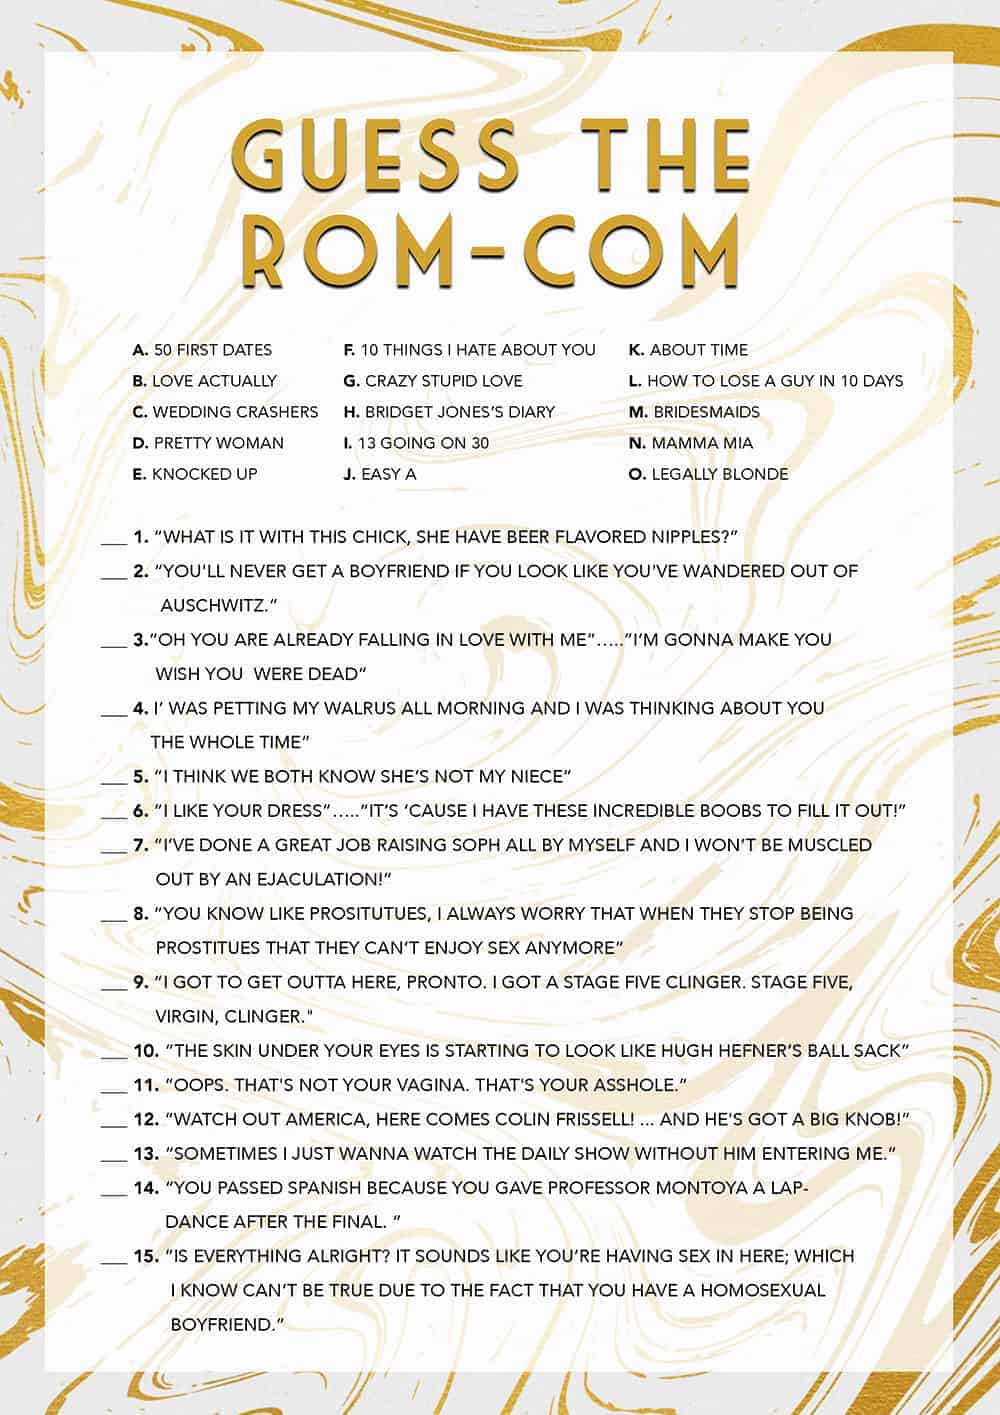 GRAB THIS FREE PRINTABLE HILARIOUS GUESS THE ROM-COM GAME!